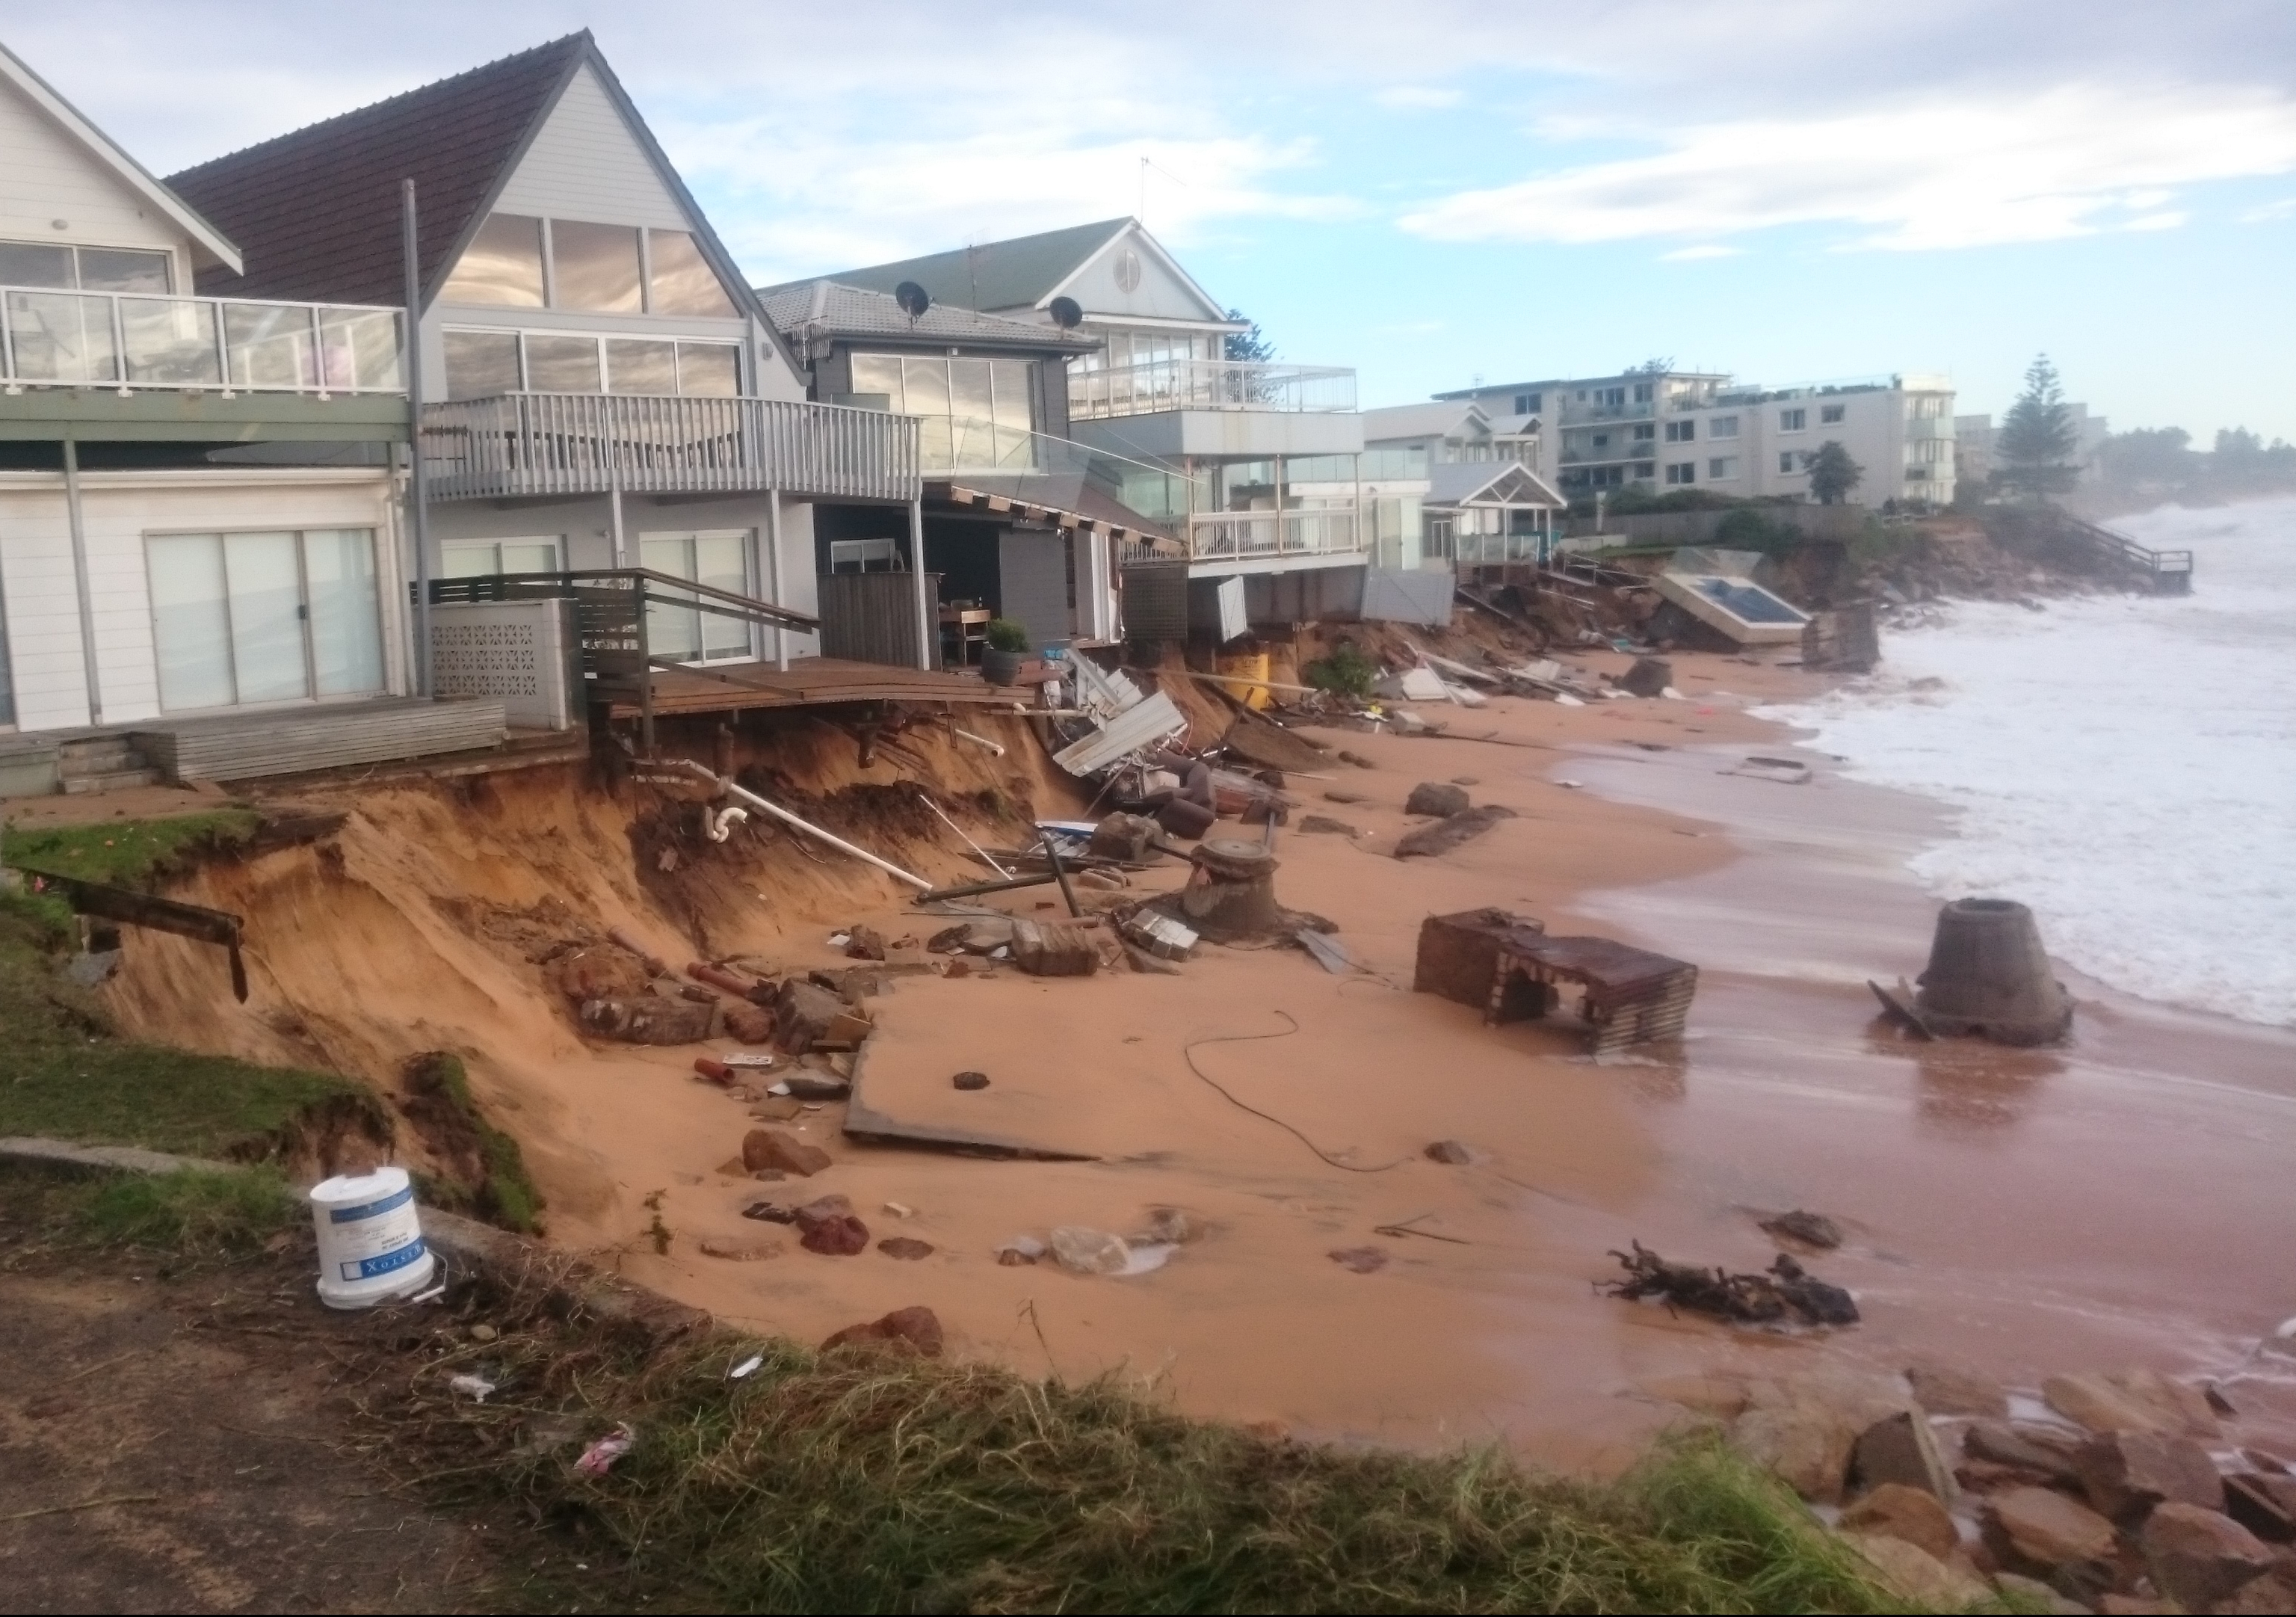 Damaged foreshore homes in Sydney&#039;s Collaroy Beach, victims of intense storms that hit eastern Australia over the weekend of 4-5 June 2016.